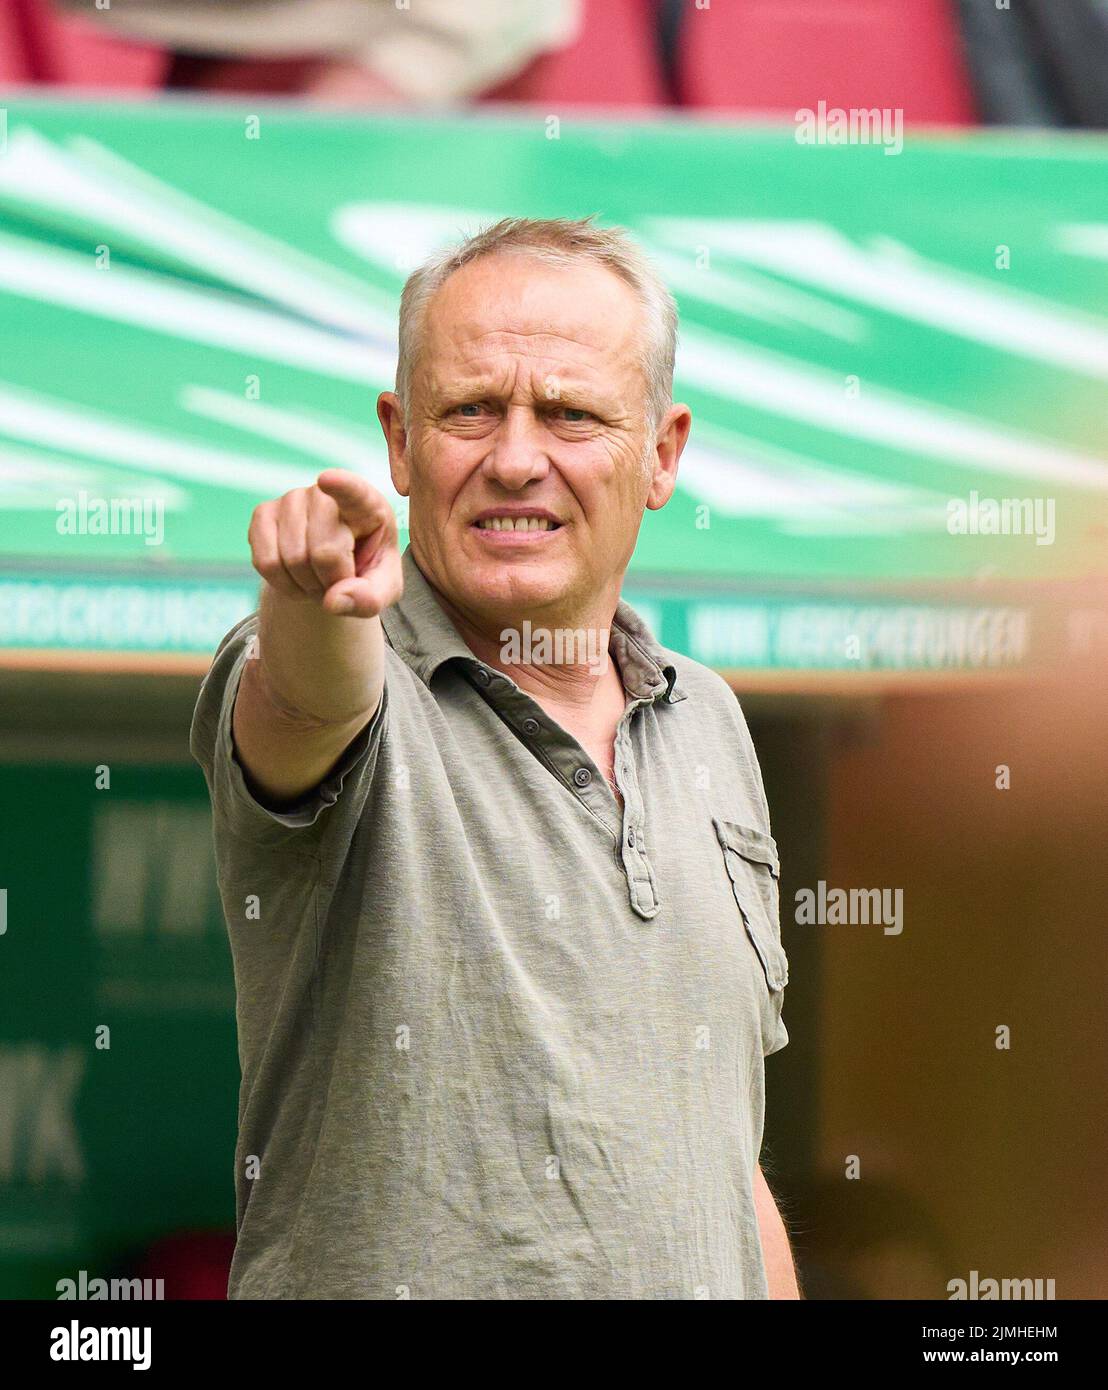 Christian STREICH, FRG Trainer , geste in the match FC AUGSBURG - SC FREIBURG 1.German Football League on Aug 06, 2022 in Augsburg, Germany. Season 2022/2023, matchday 1, 1.Bundesliga, FCB, Munich, 1.Spieltag © Peter Schatz / Alamy Live News    - DFL REGULATIONS PROHIBIT ANY USE OF PHOTOGRAPHS as IMAGE SEQUENCES and/or QUASI-VIDEO - Stock Photo